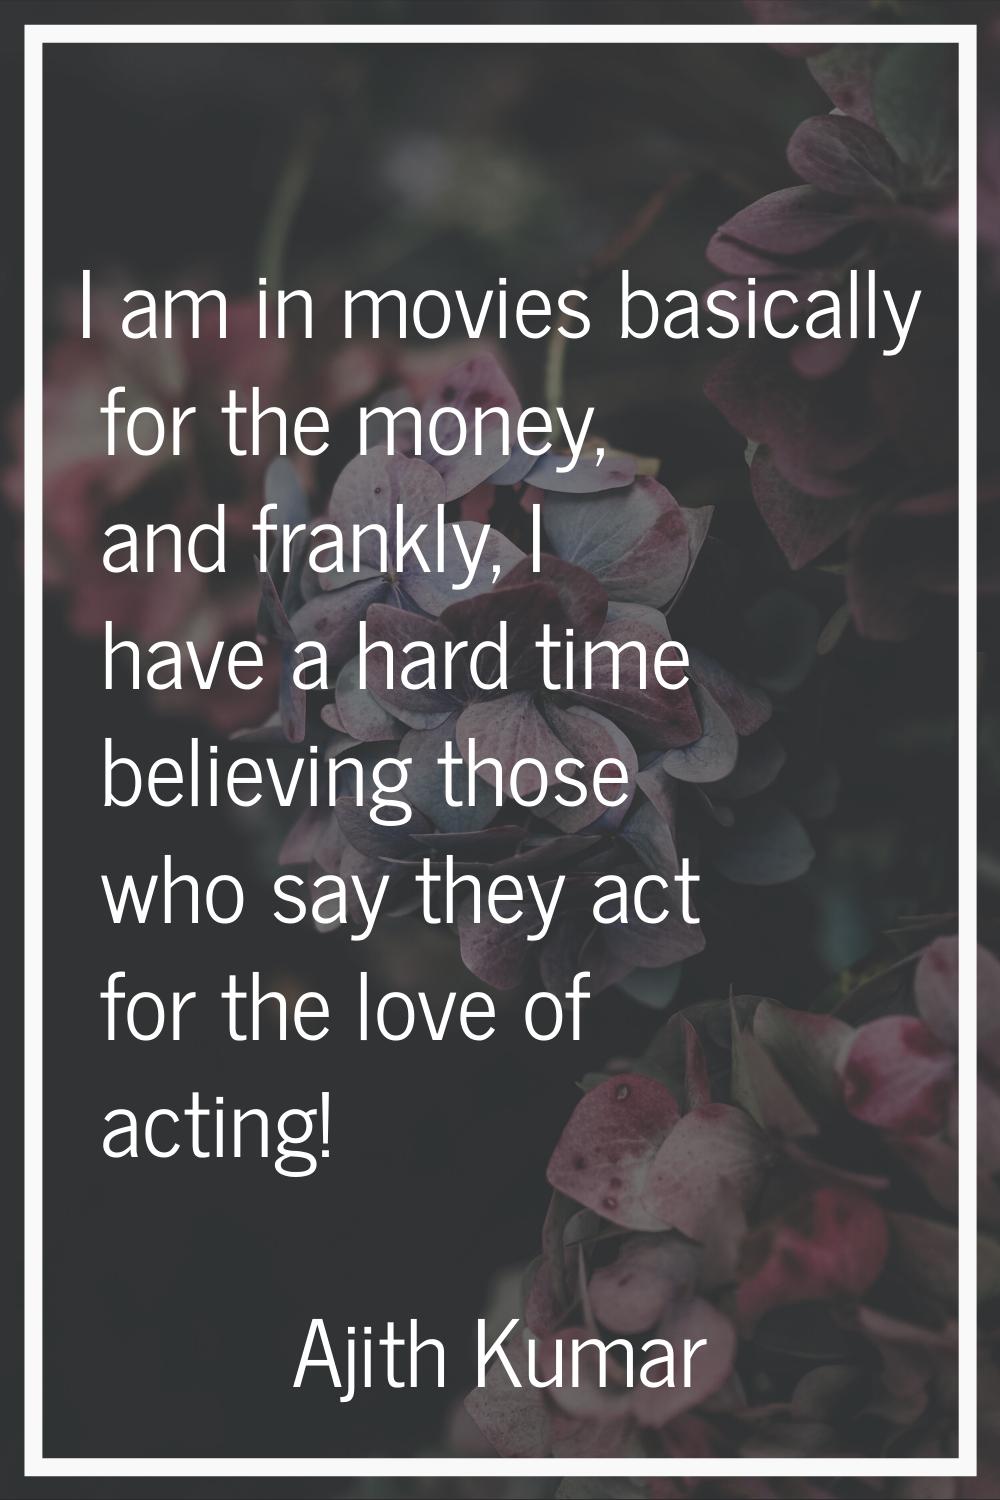 I am in movies basically for the money, and frankly, I have a hard time believing those who say the